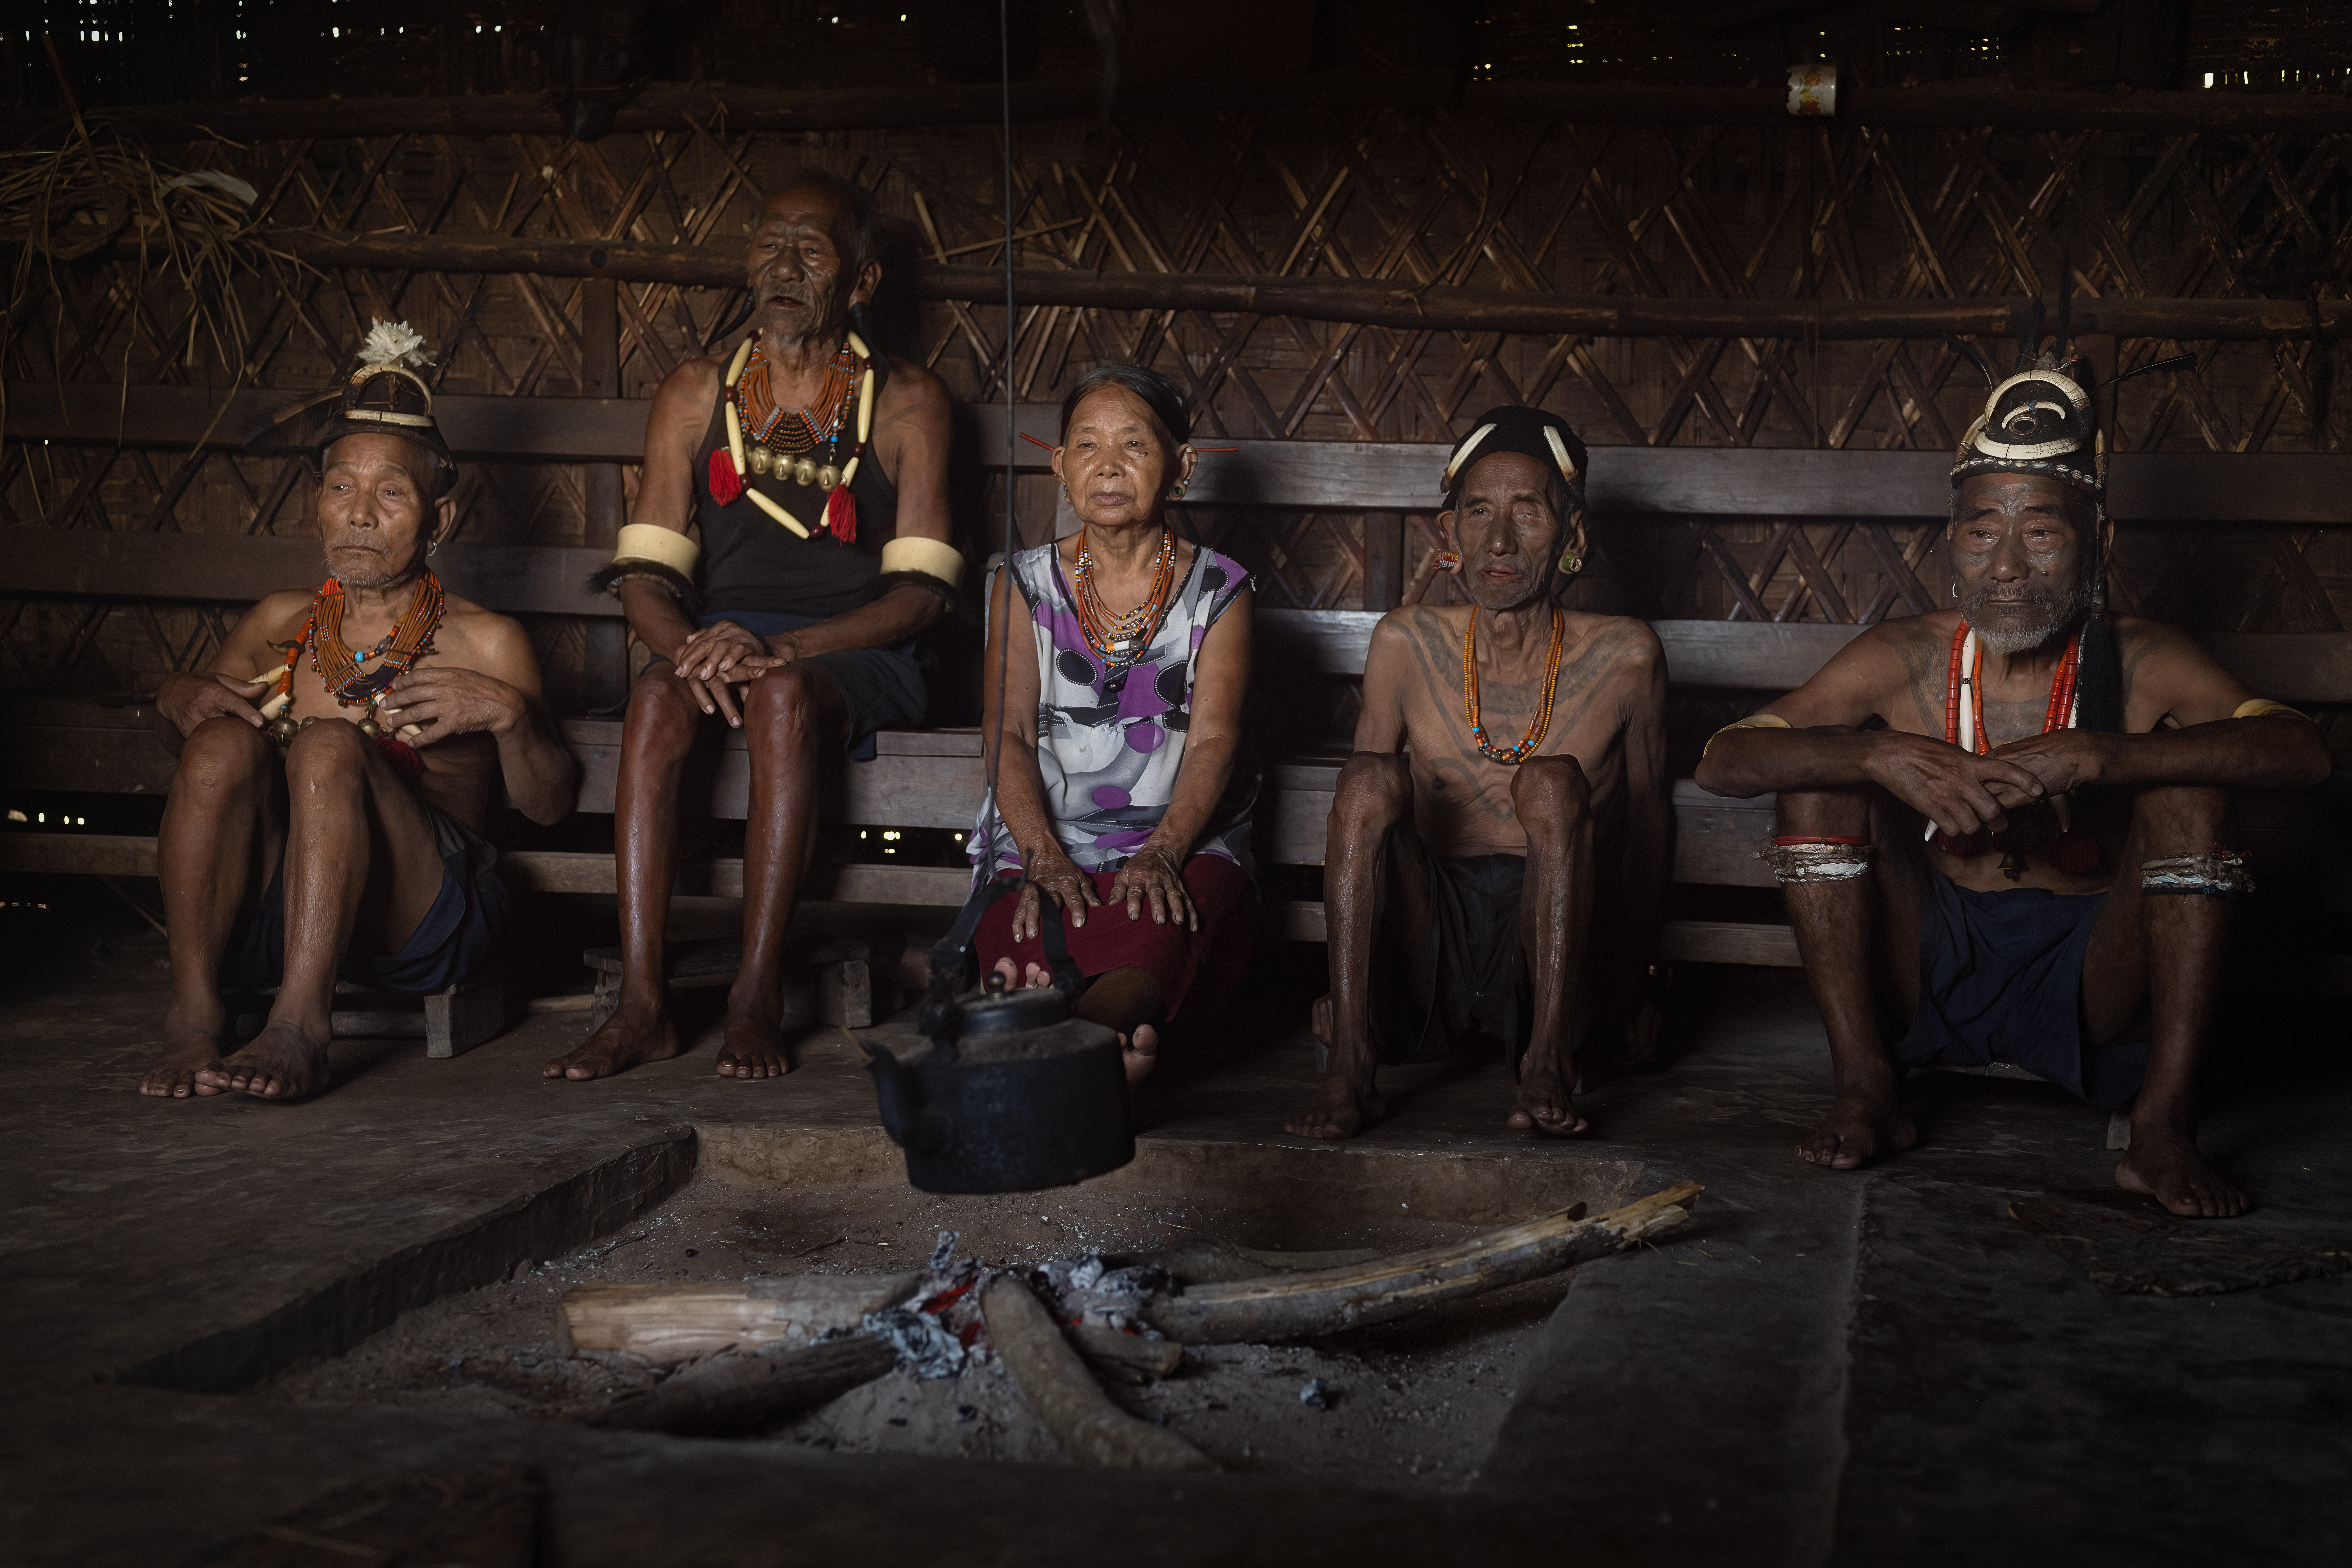 Elders of this Konyak tribe in Nagaland, including the Queen of the village.